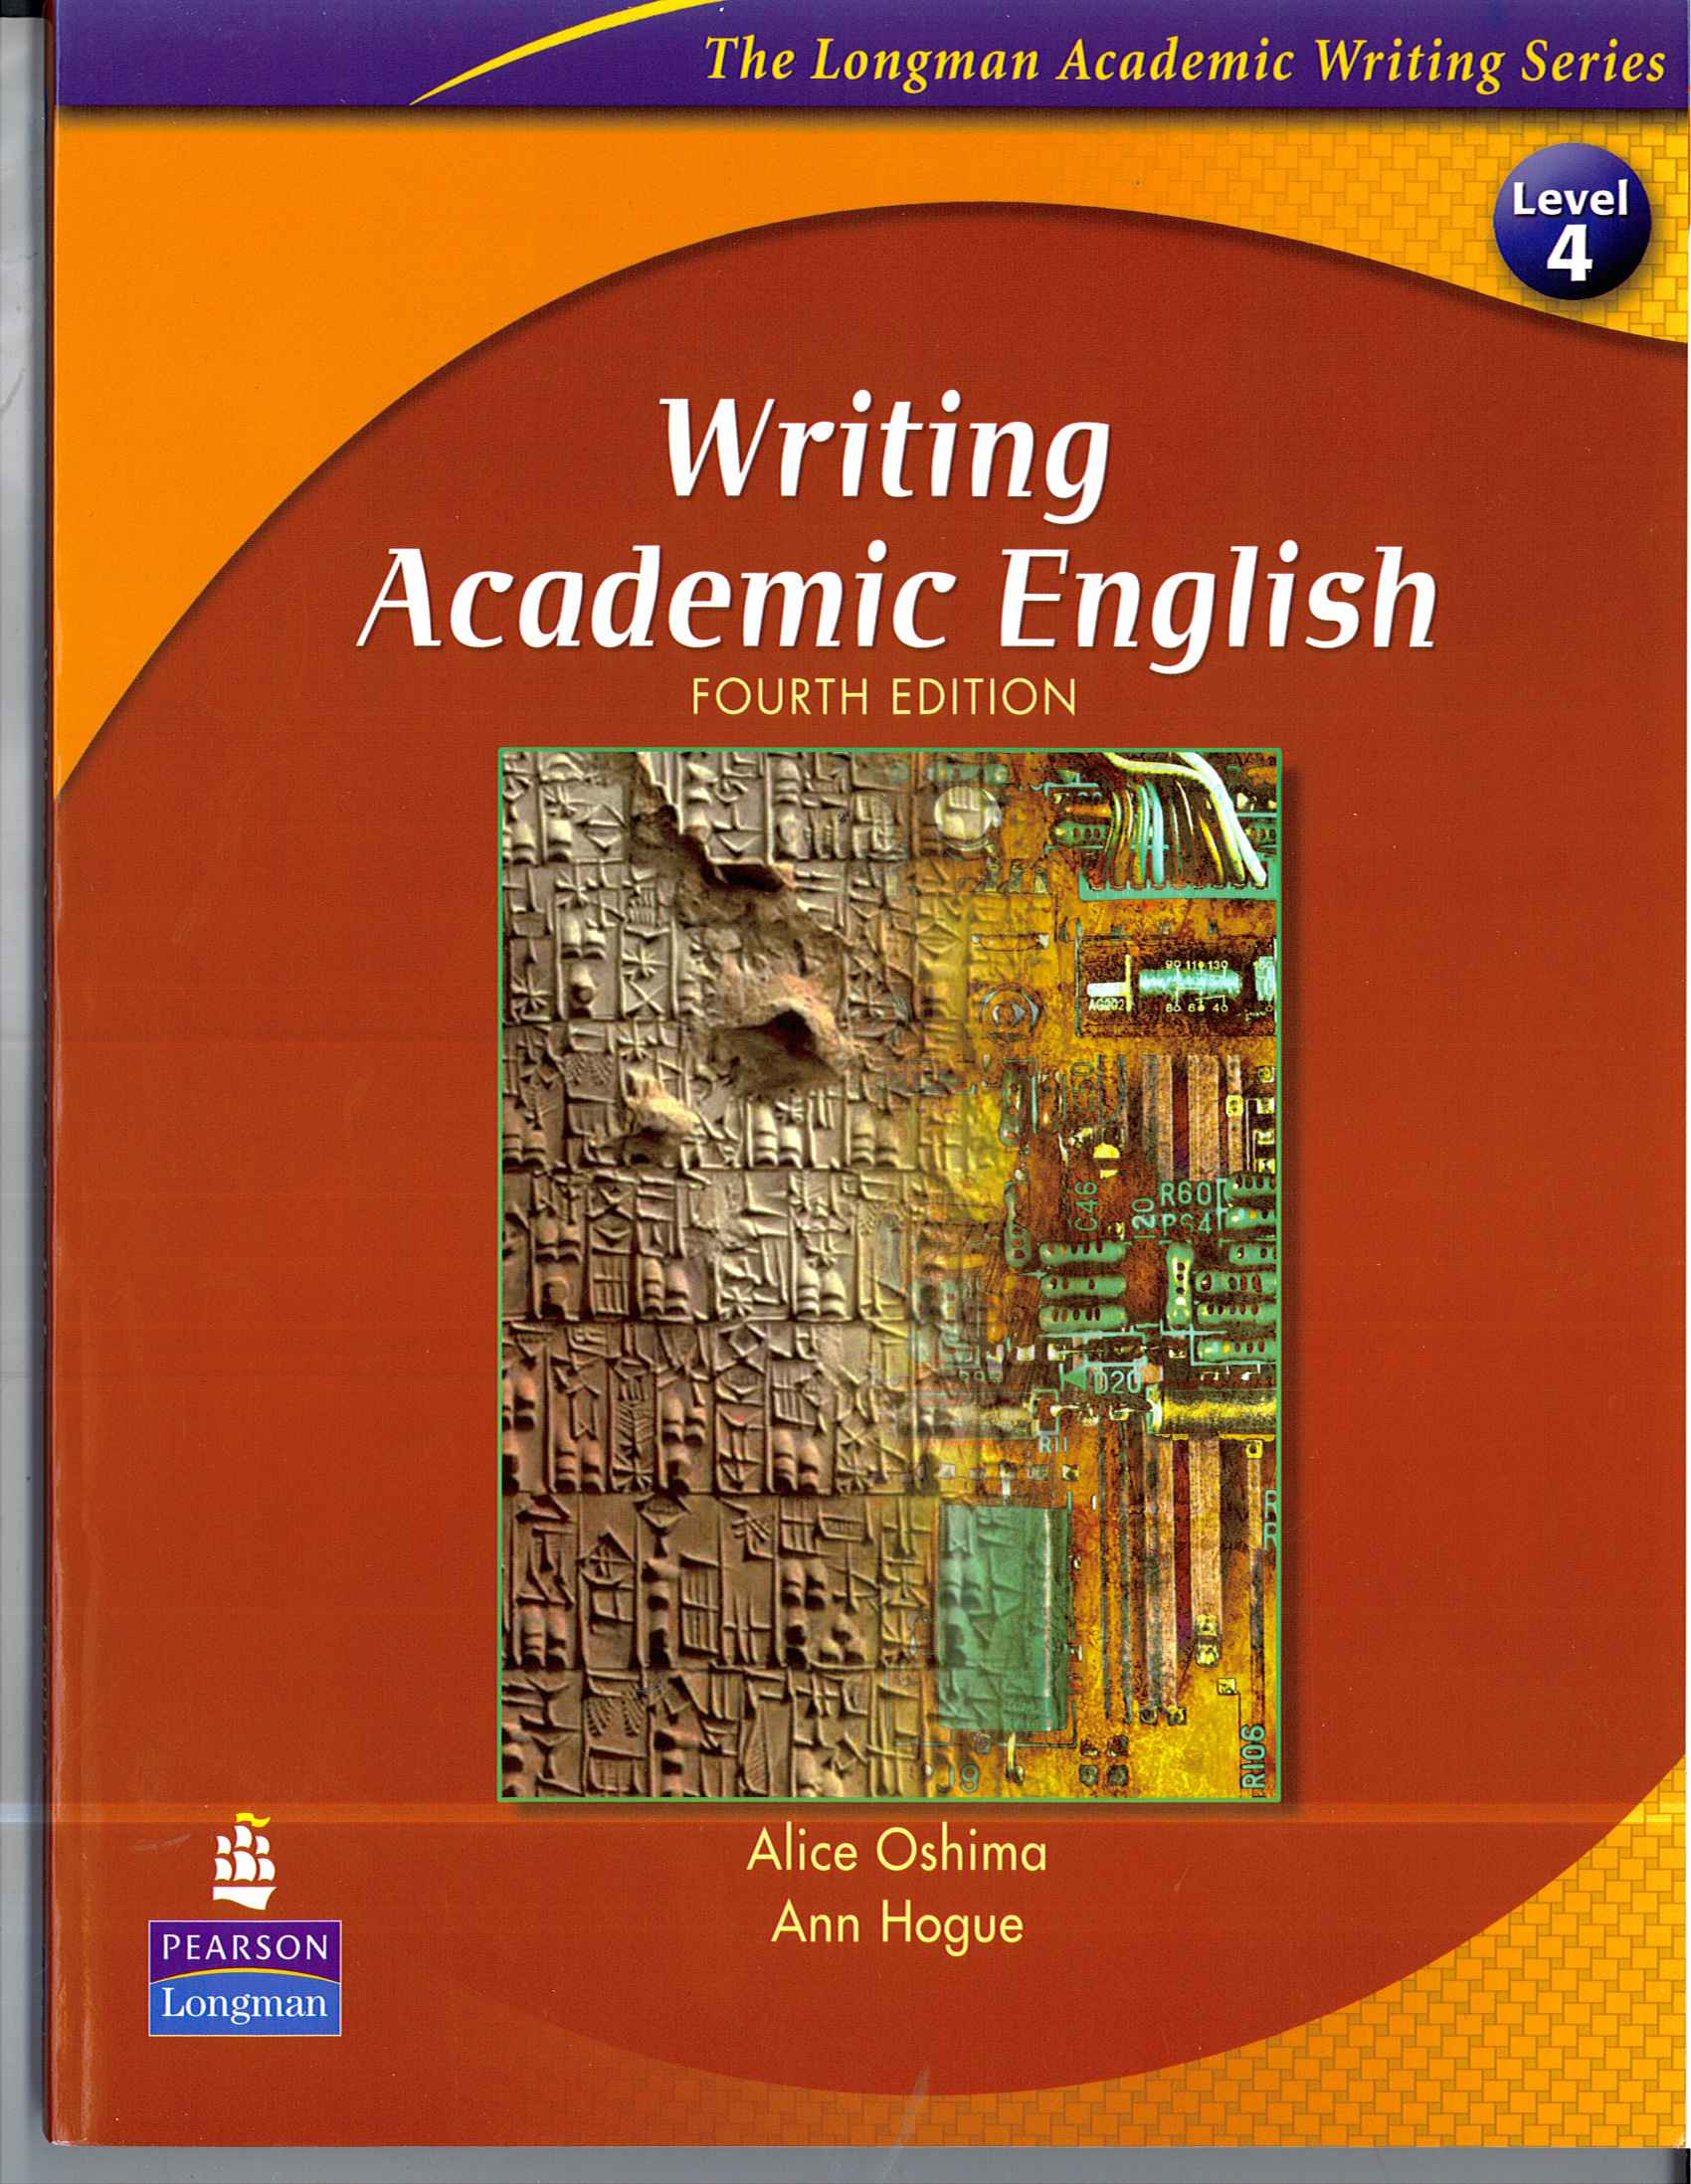 introduction to academic writing third edition the longman academic writing series level 3